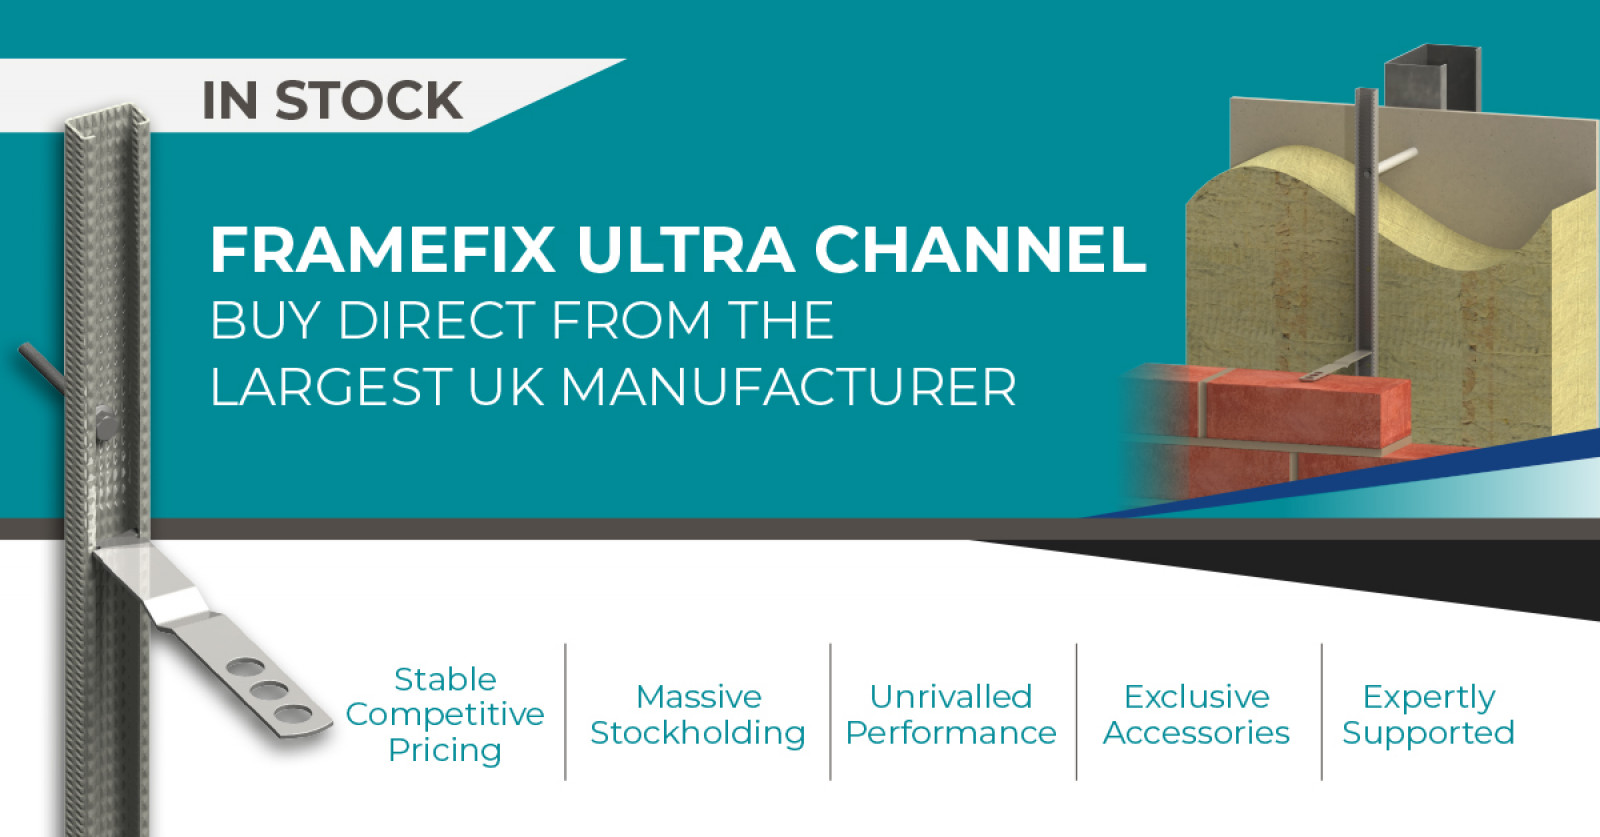 FRAMEFIX ULTRA CHANNEL: UNRIVALLED PERFORMANCE FRO...